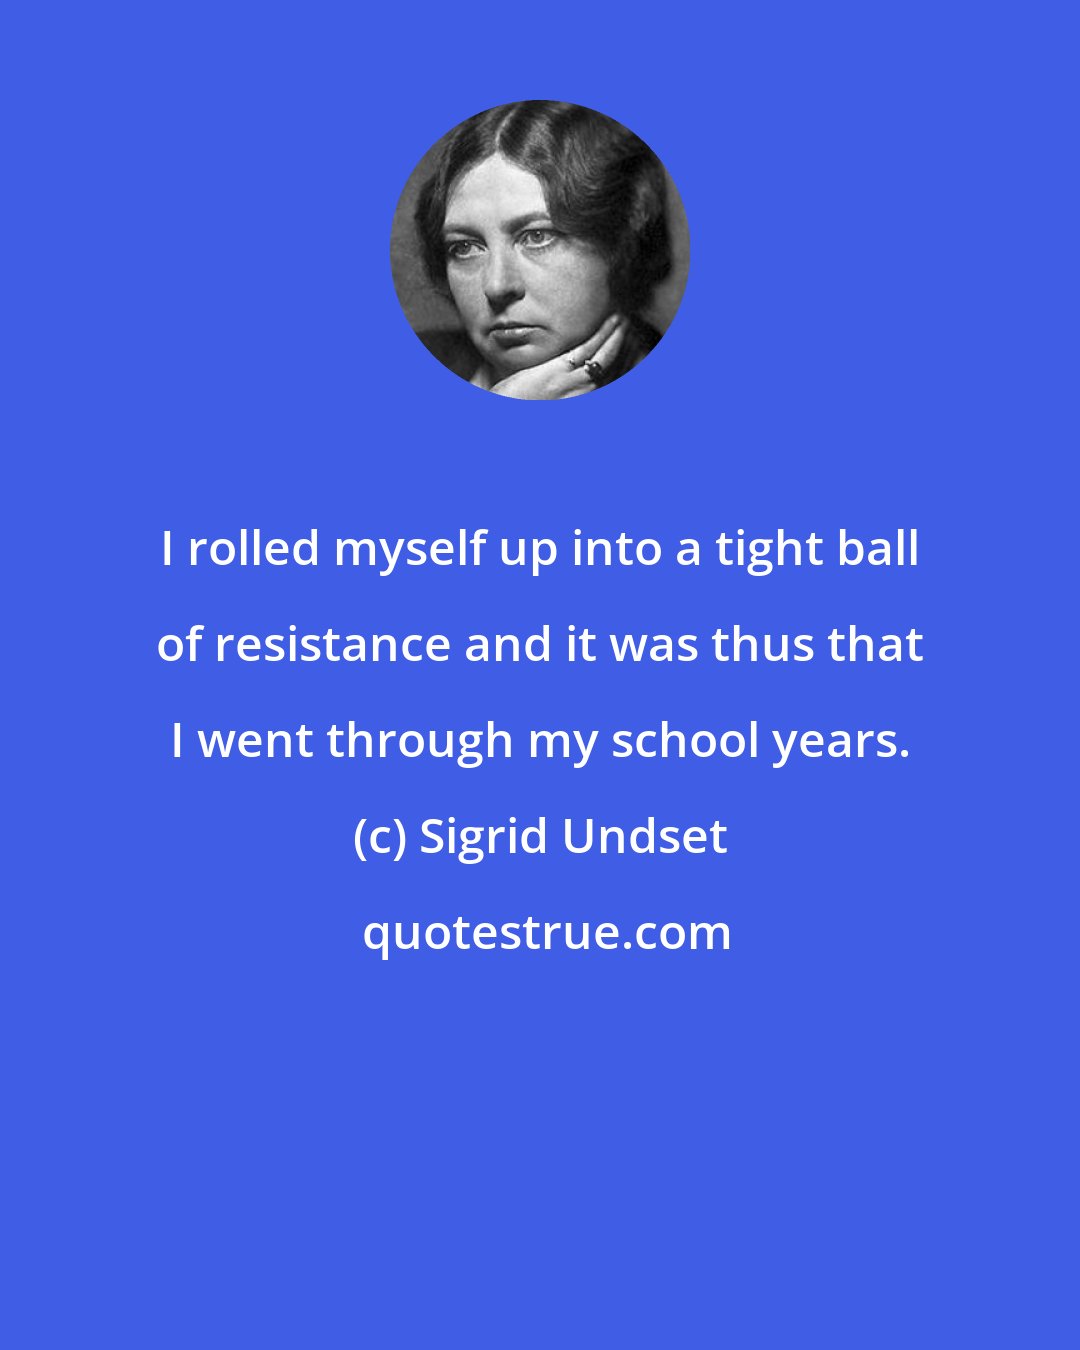 Sigrid Undset: I rolled myself up into a tight ball of resistance and it was thus that I went through my school years.